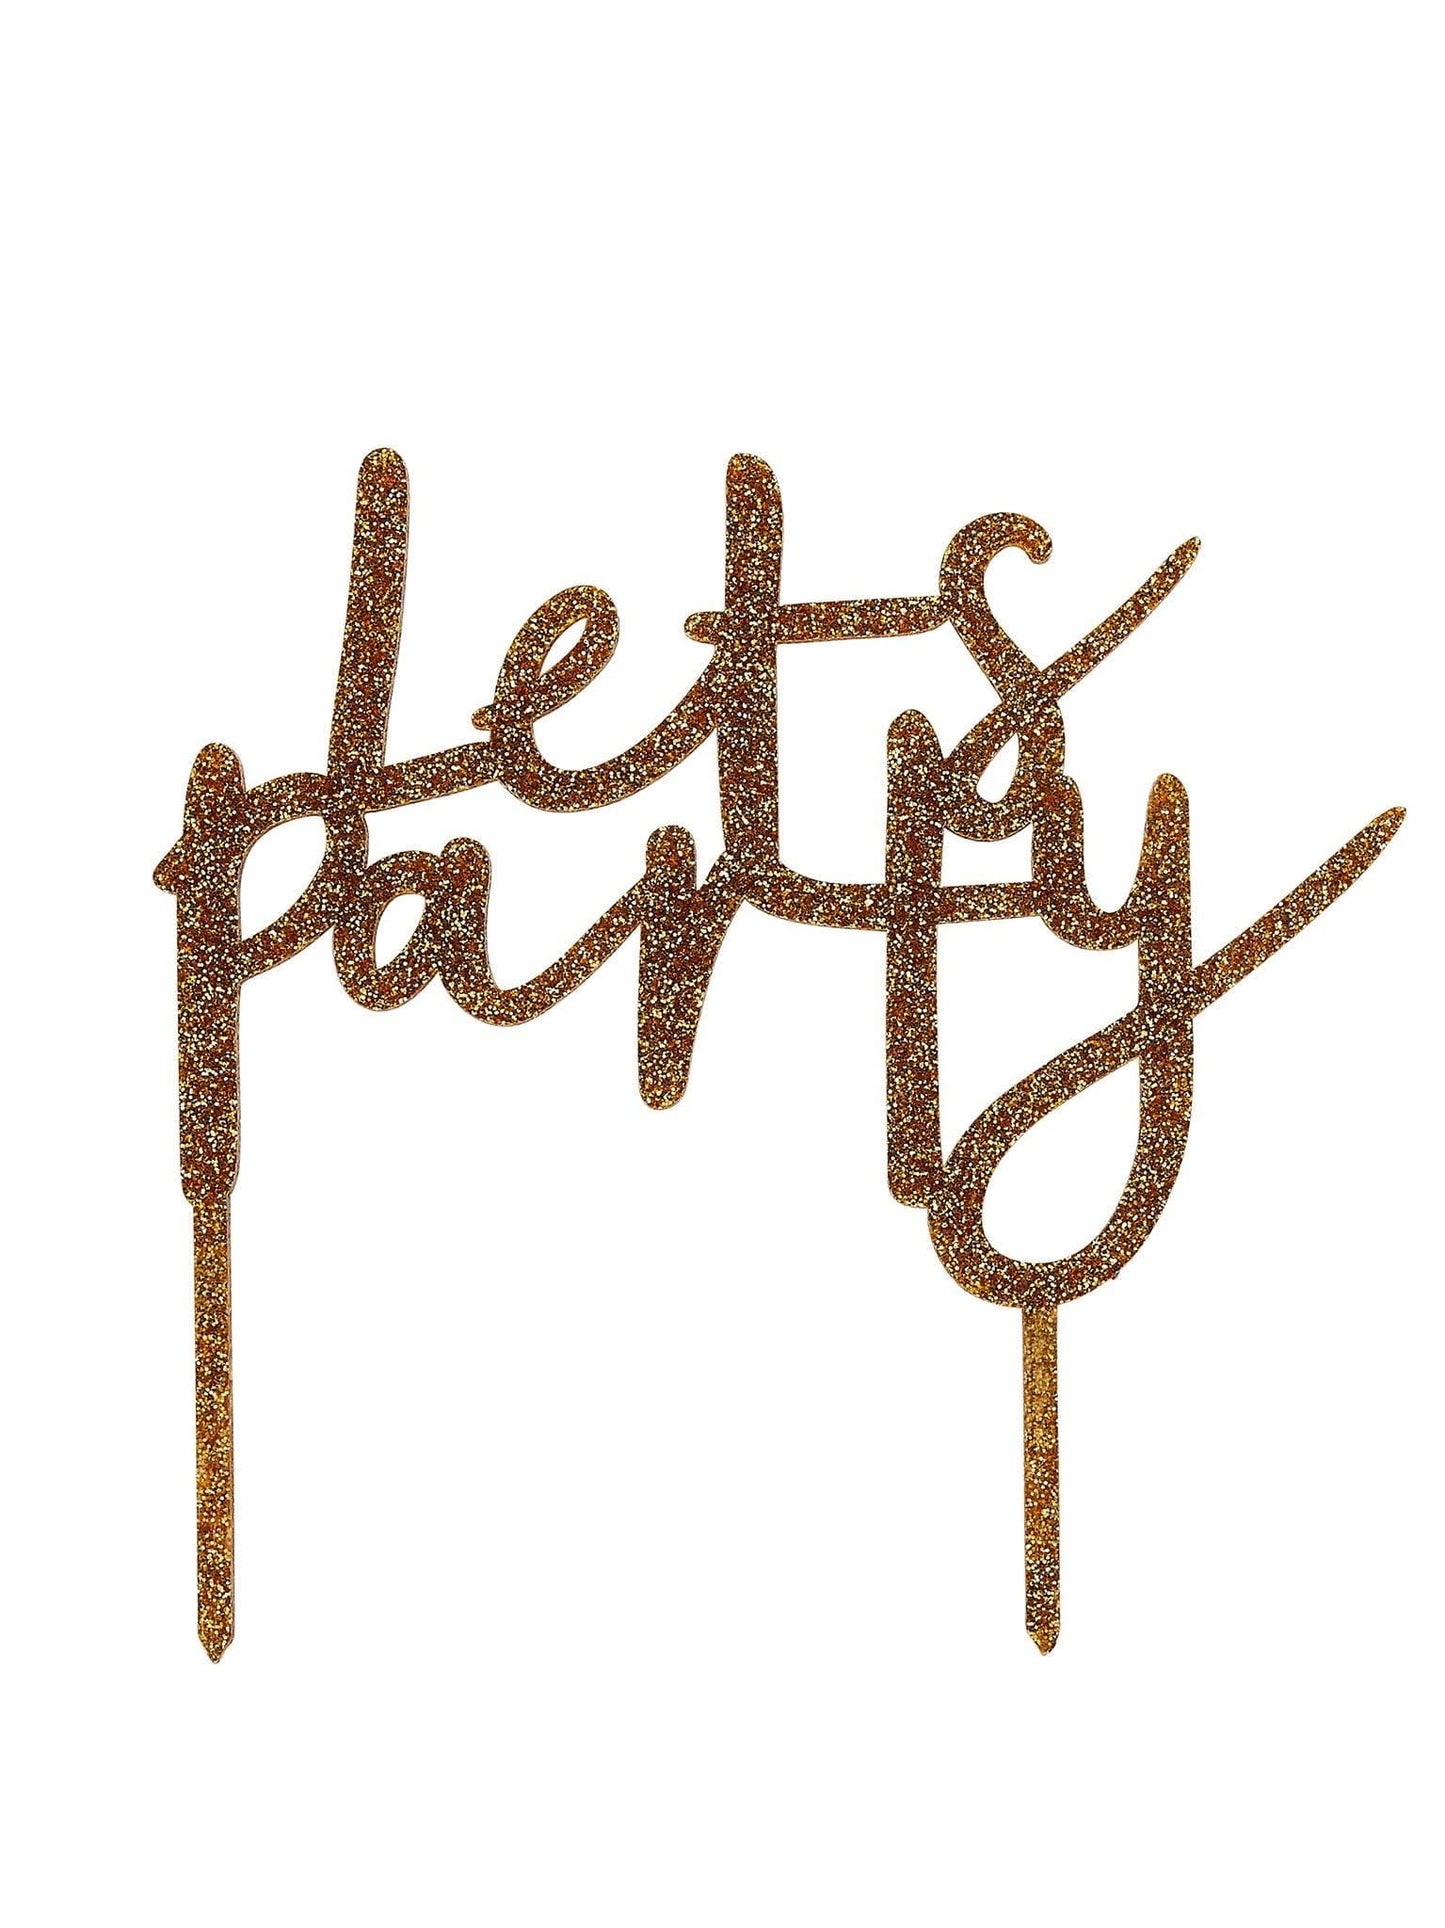 Let's Party Cake Toppers - Patisserie Valerie